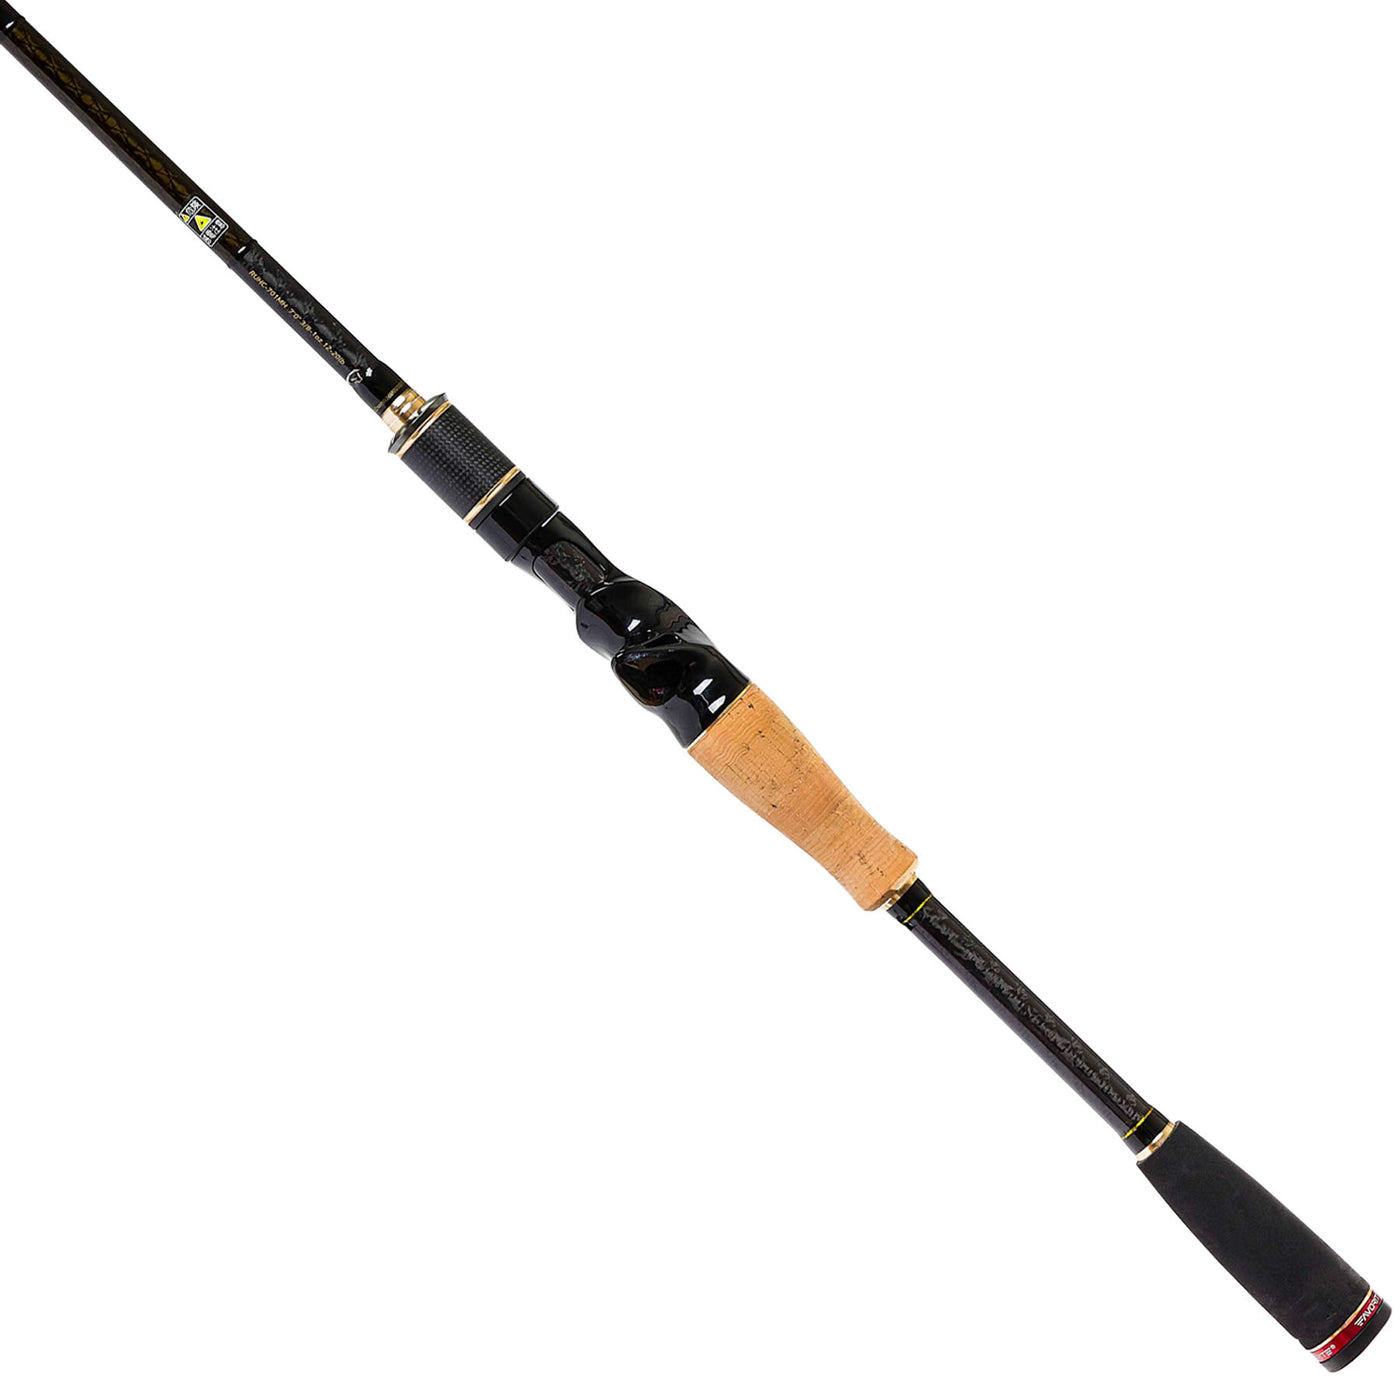 Favorite Fishing Rods - Looking for the perfect travel rod? The 4pc Favorite  Army Geo comes in it's own carrying case and is ready for your next flight  or impromptu fishing trip. #